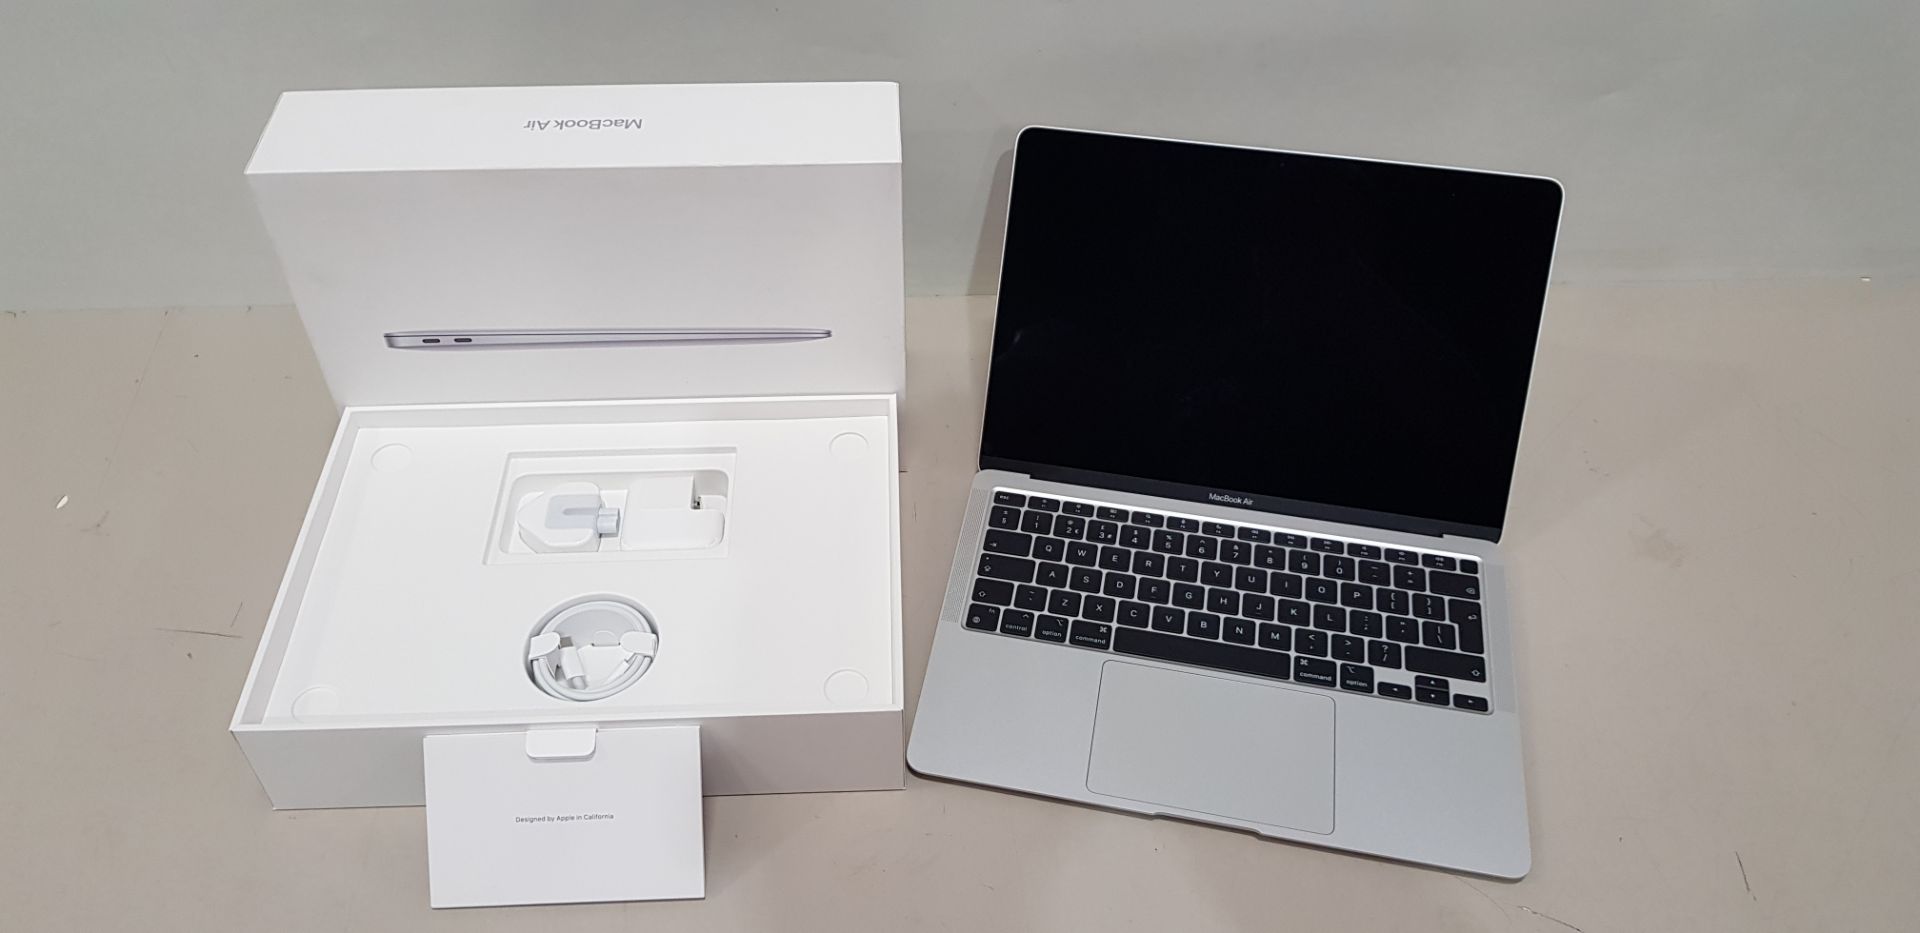 1 X BRAND NEW APPLE MACBOOK AIR ( MODEL A2337) / 13 INCH SCREEN / APPLE M1 CHIP / 8 GB UNIFIED